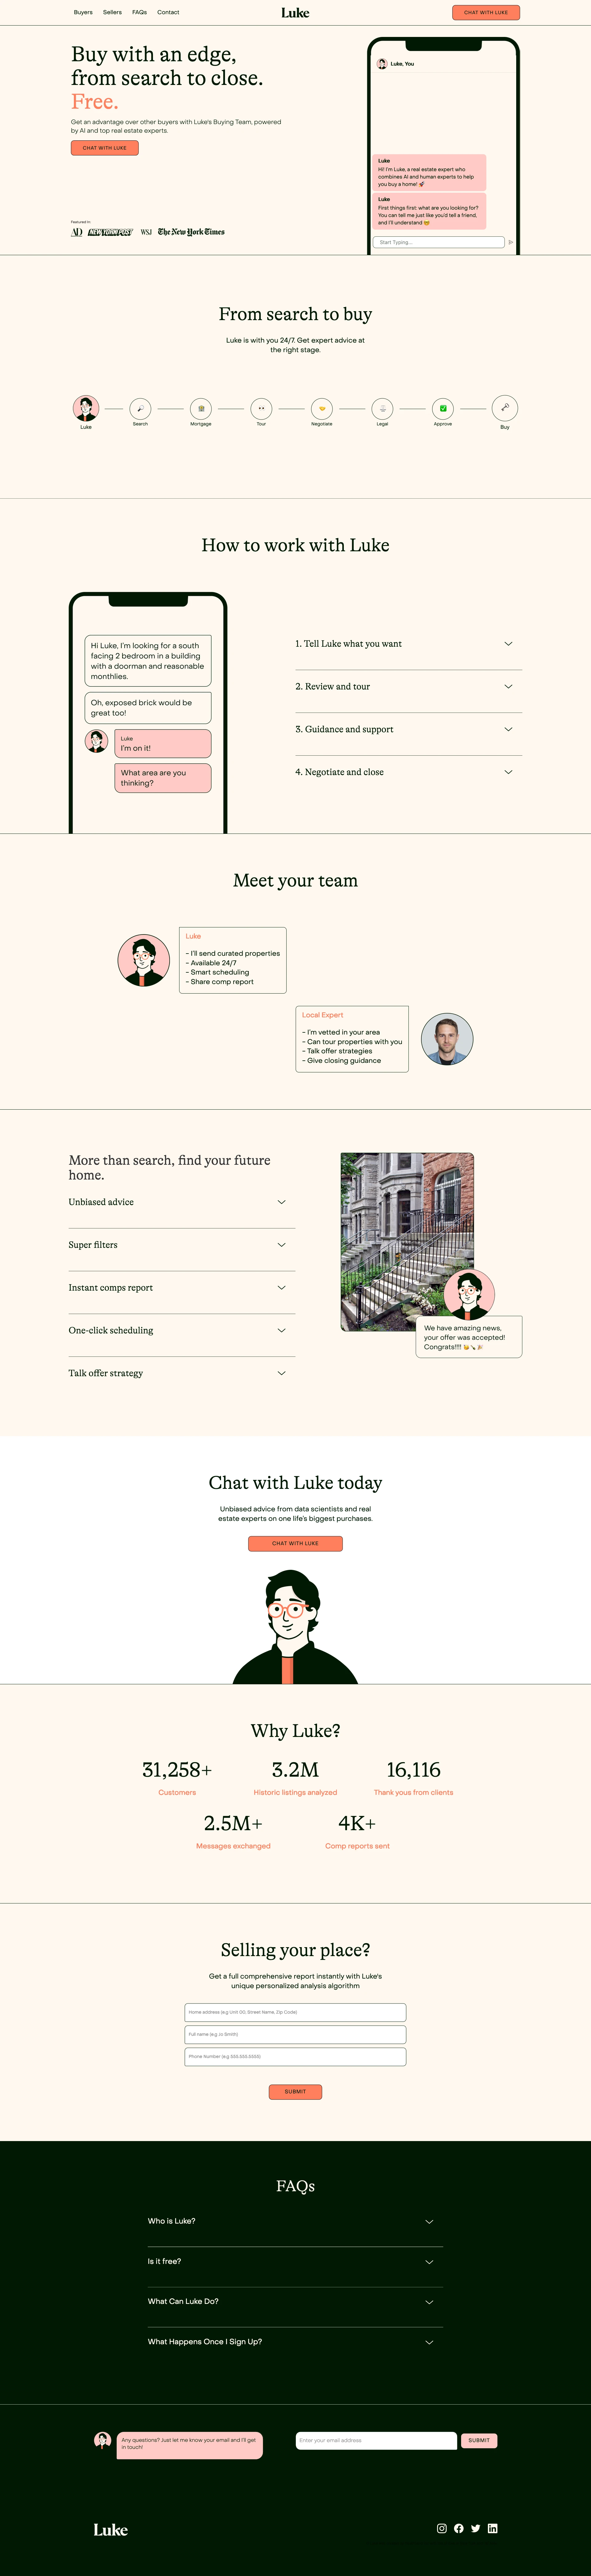 Luke Landing Page Example: Get an advantage over other buyers with a dedicated and personal Luke Buying Team that makes your home buying process smoother and smarter.